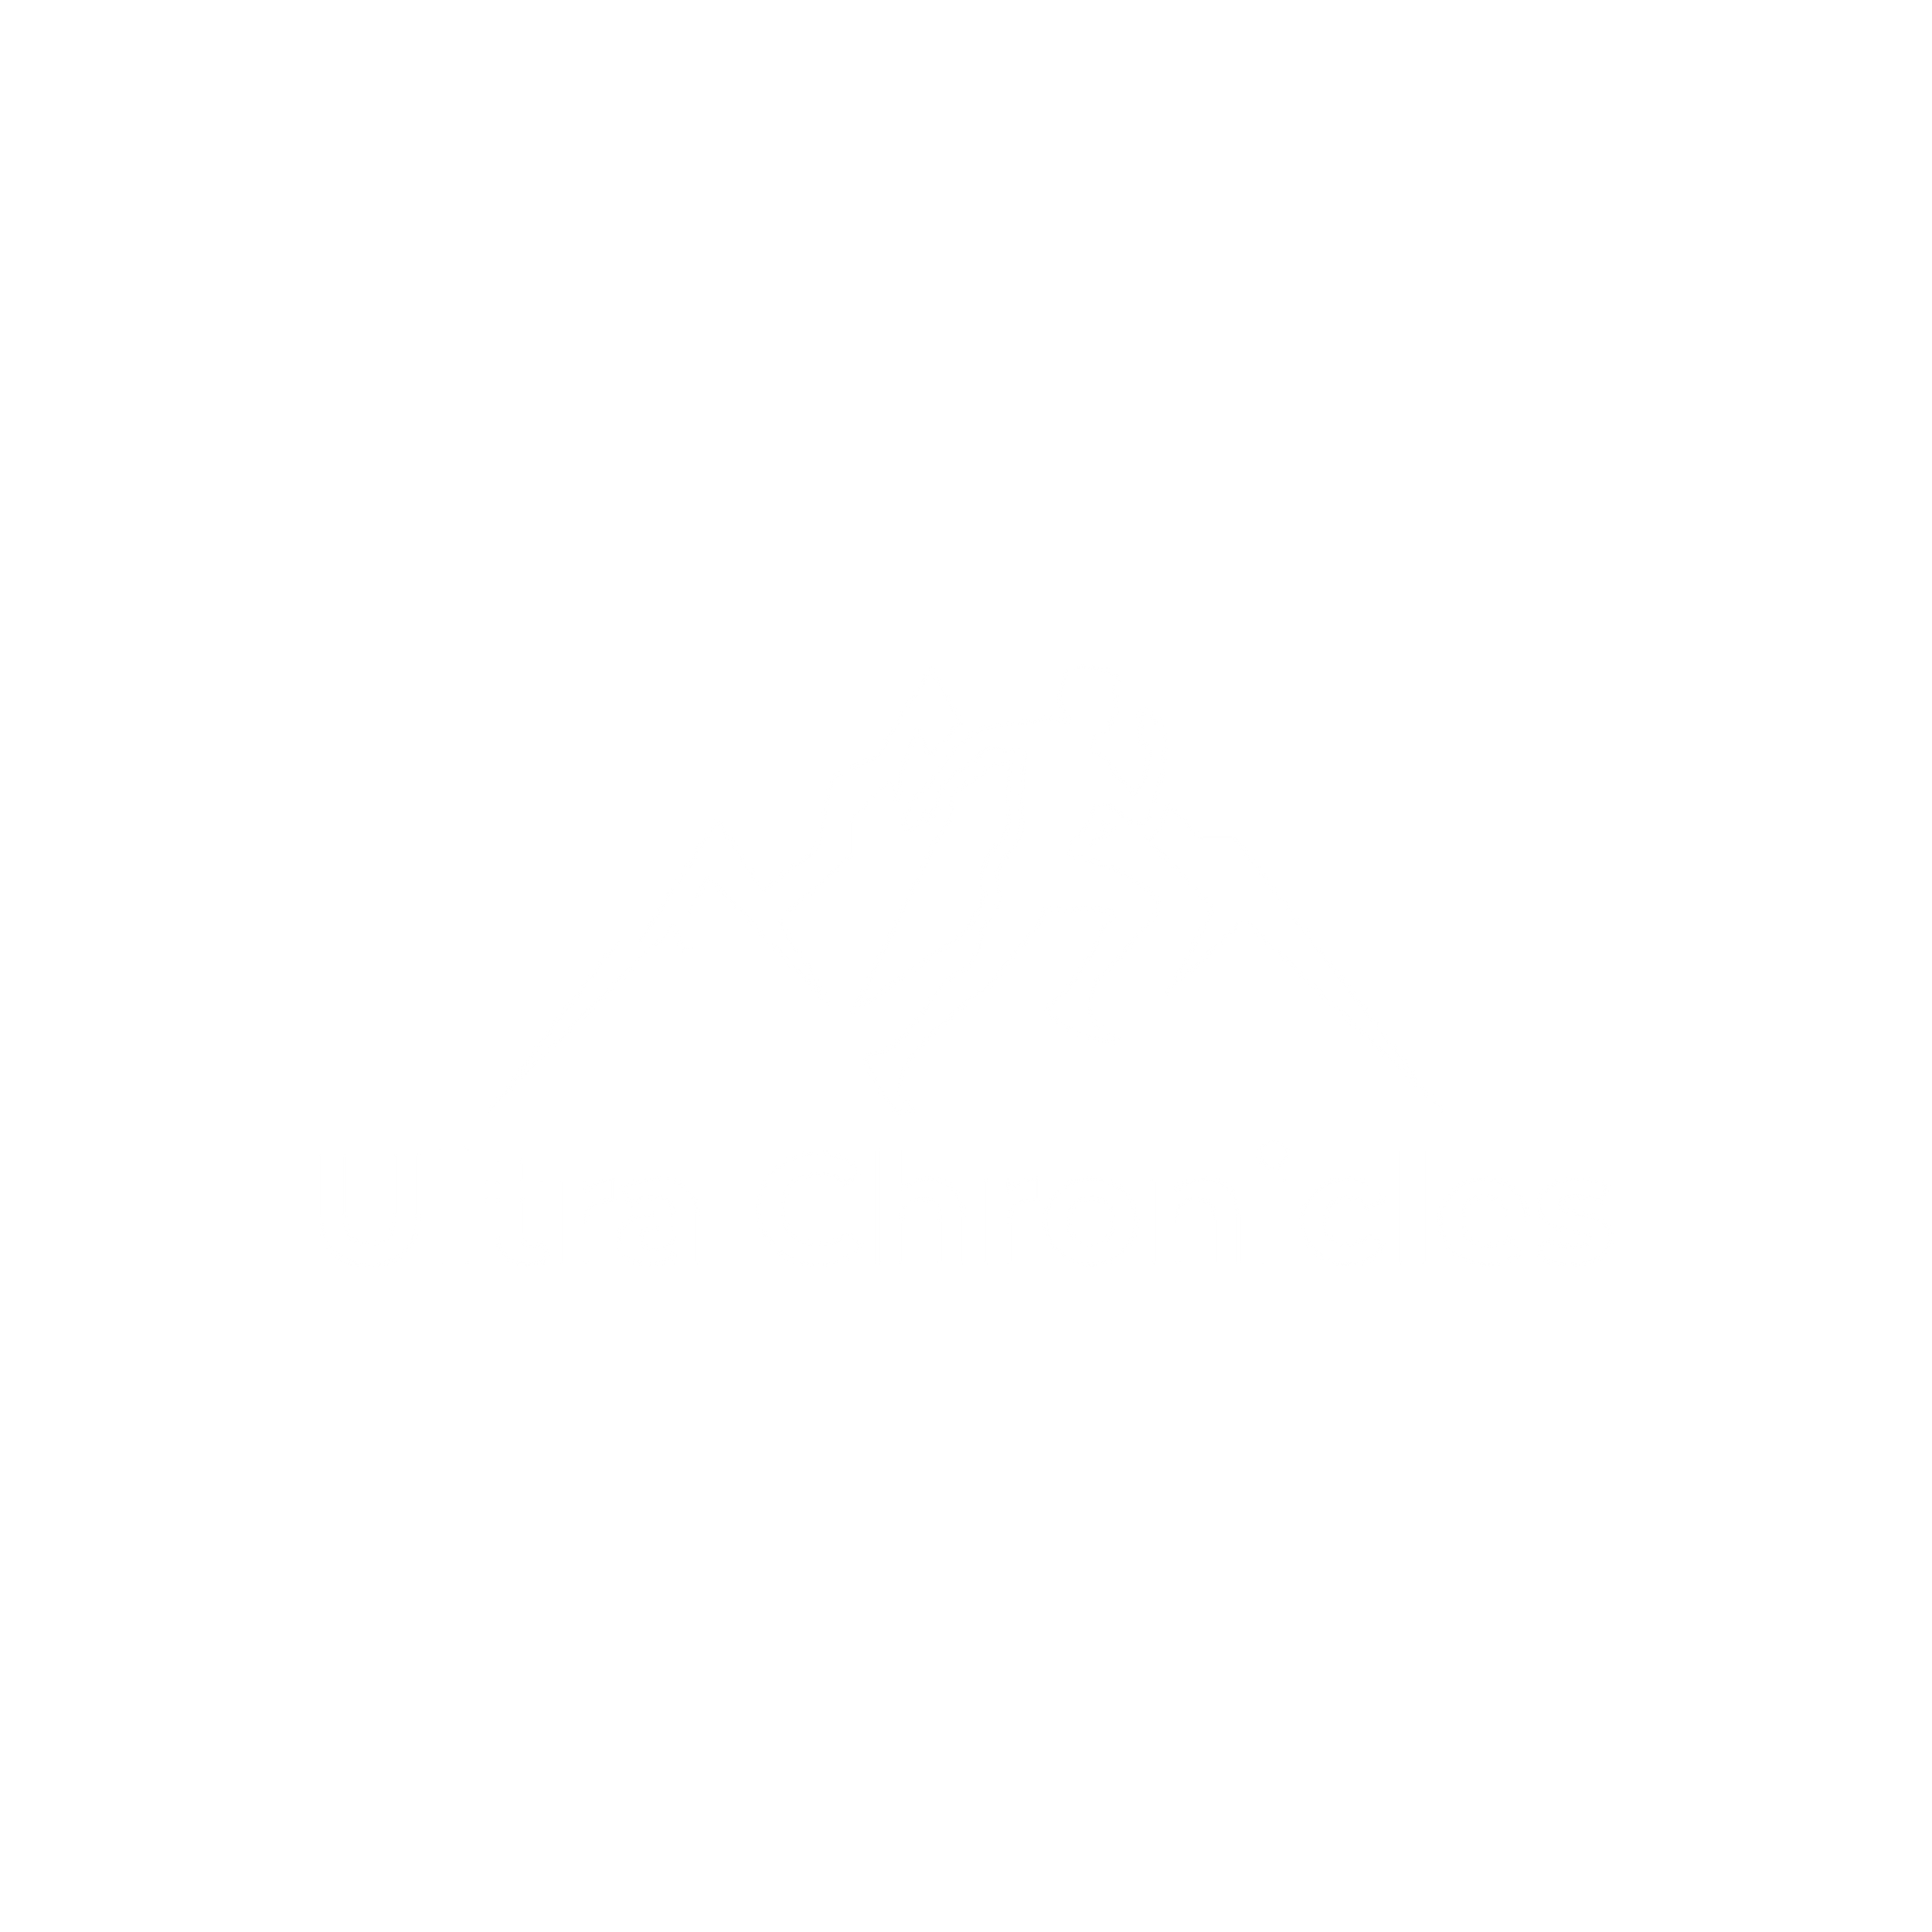 The Ultra Chronicles